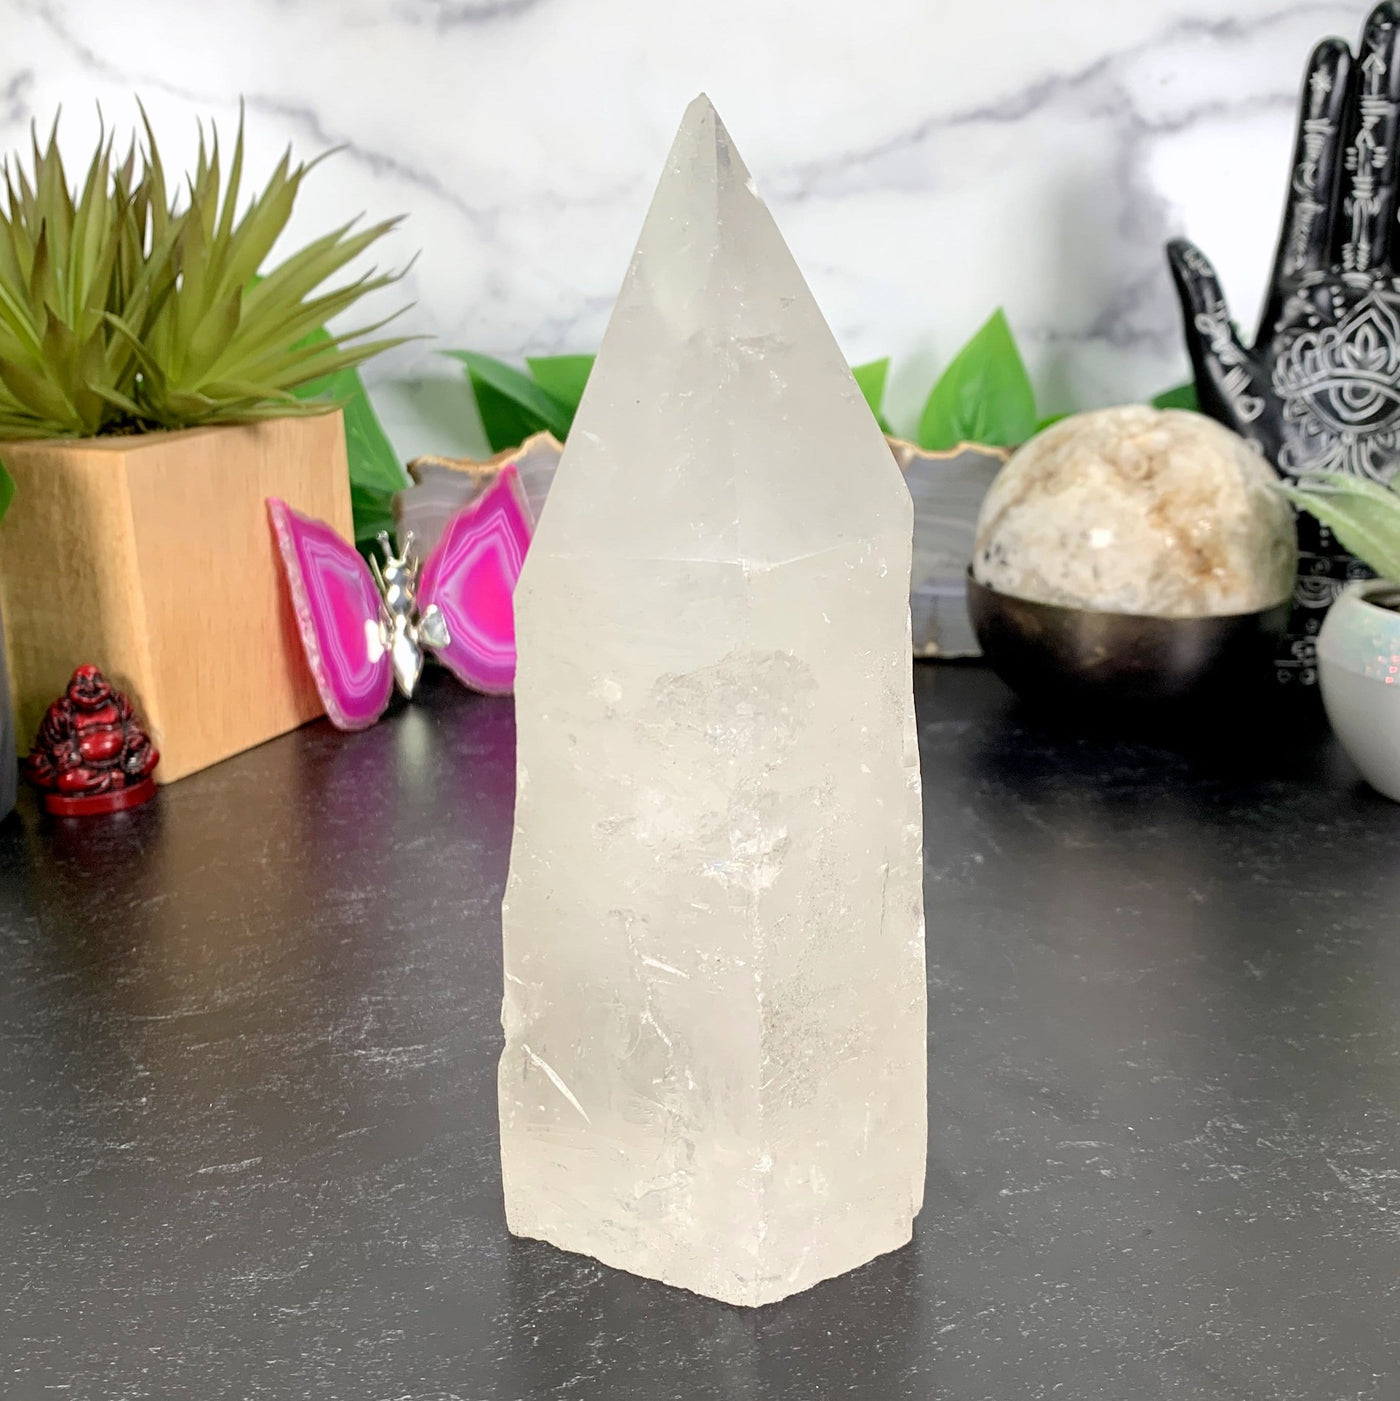 Quartz Point With Crystal Growth with decorations in the background